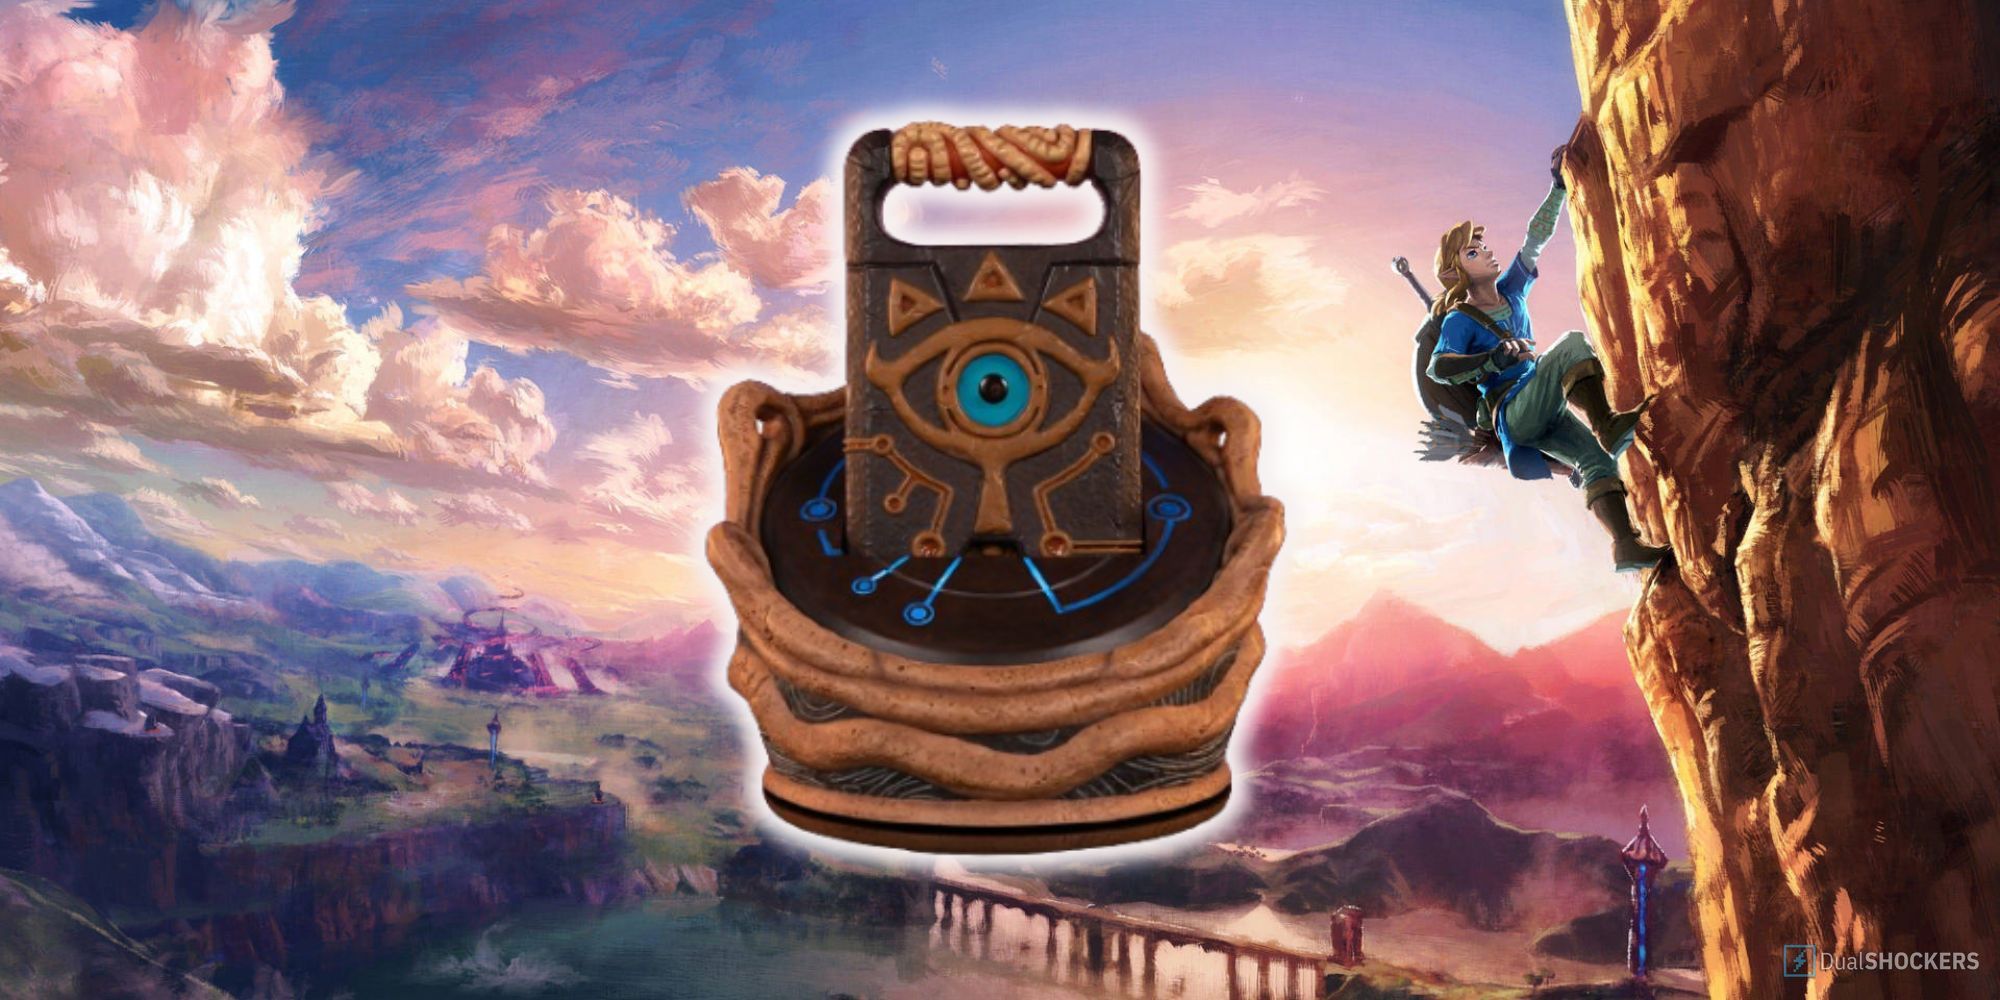 Still of the Sheikah Slate statue from The Legend of Zelda: Breath of the Wild on a background of Hyrule